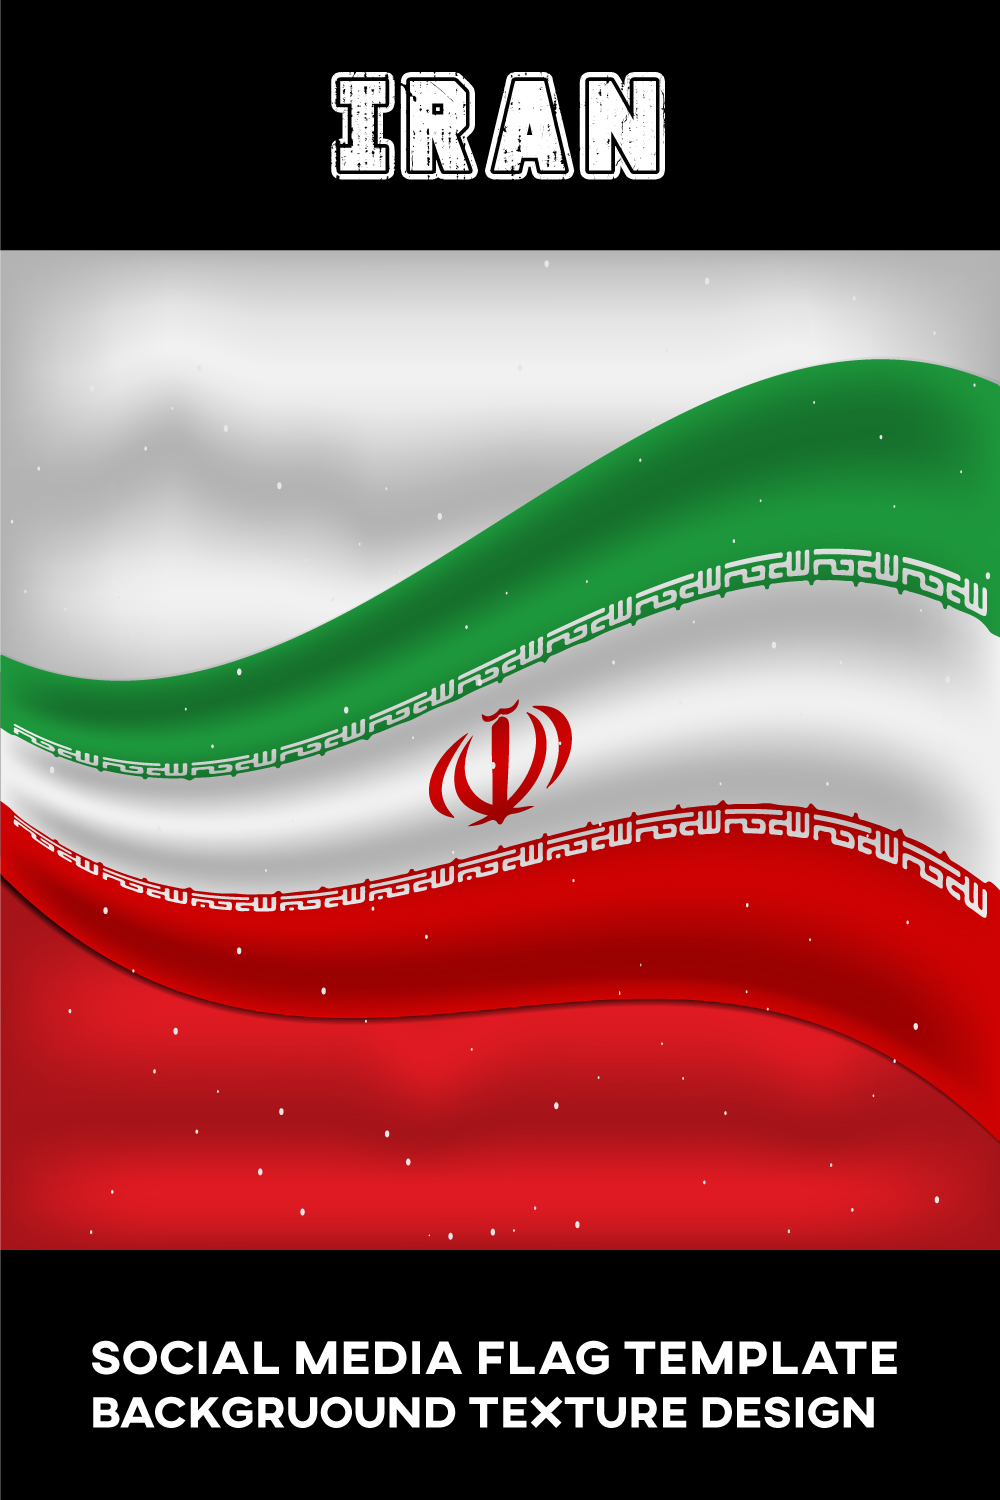 Beautiful image of the flag of Iran.